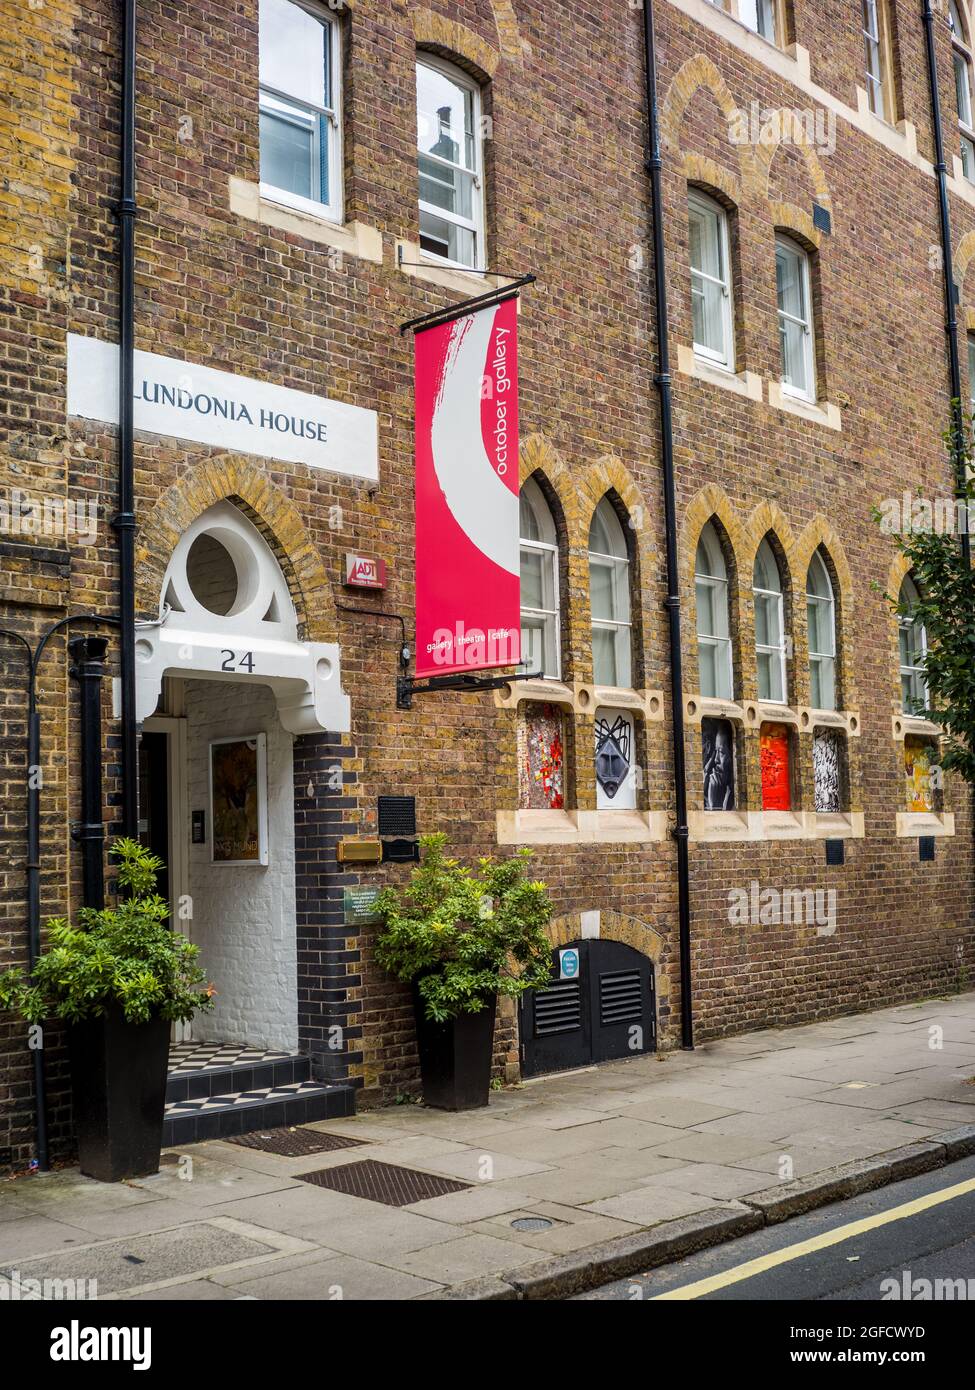 October Gallery London - London Art Gallery that promotes the Transvangarde movement, founded in 1979, at 24 Old Gloucester St London. Stock Photo